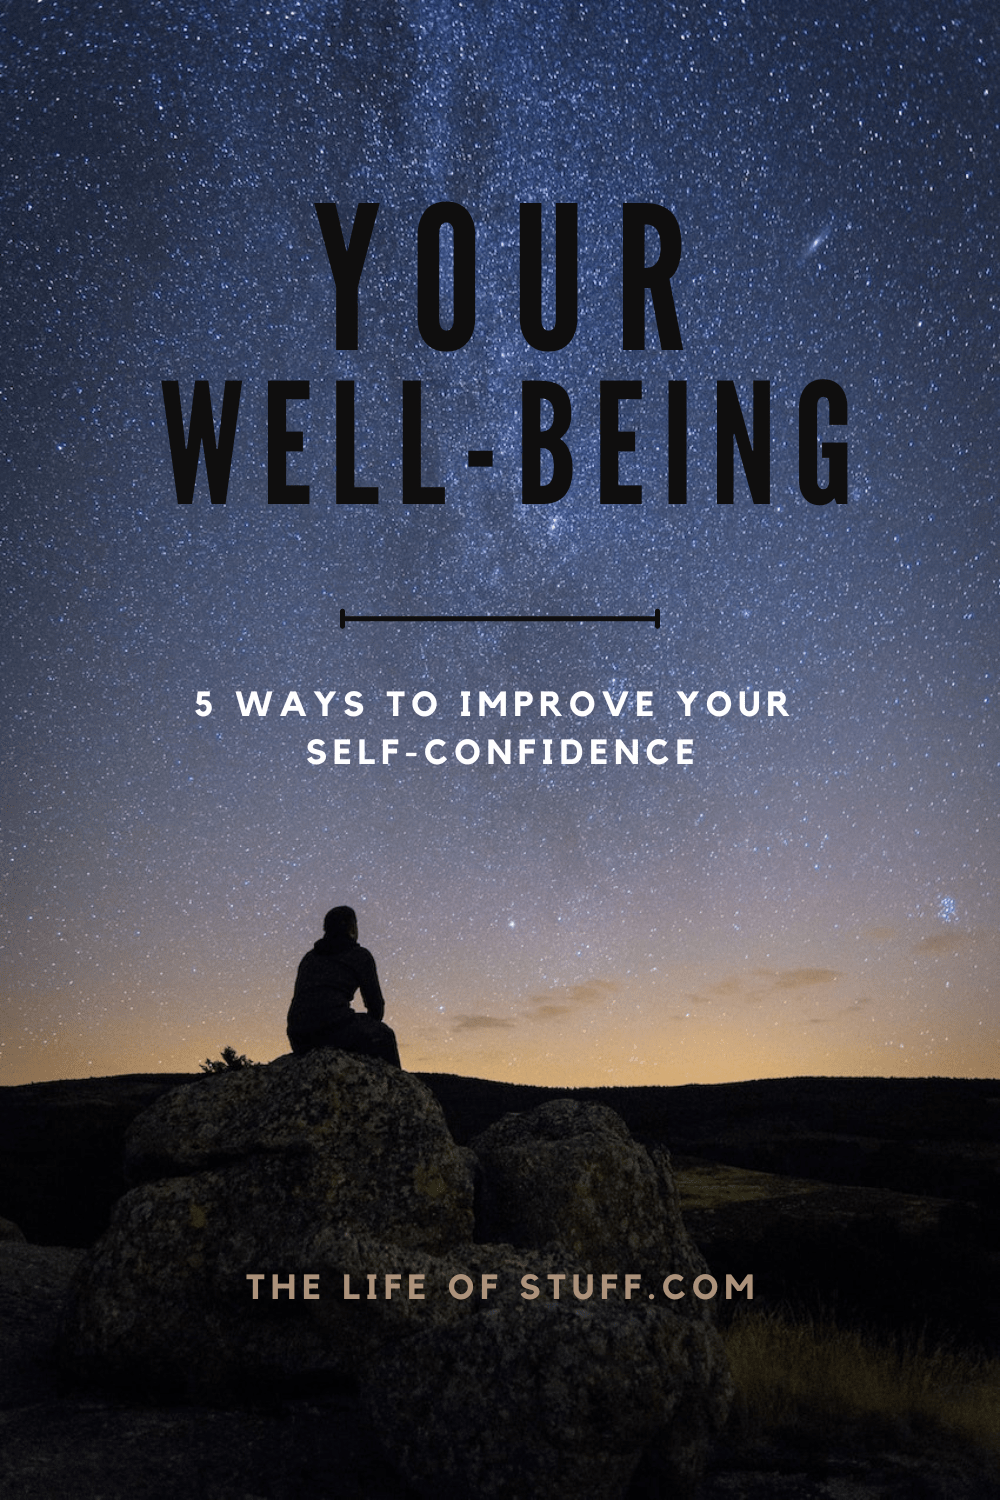 Your Well-Being - 5 Ways to Improve Your Self-Confidence - The Life of Stuff